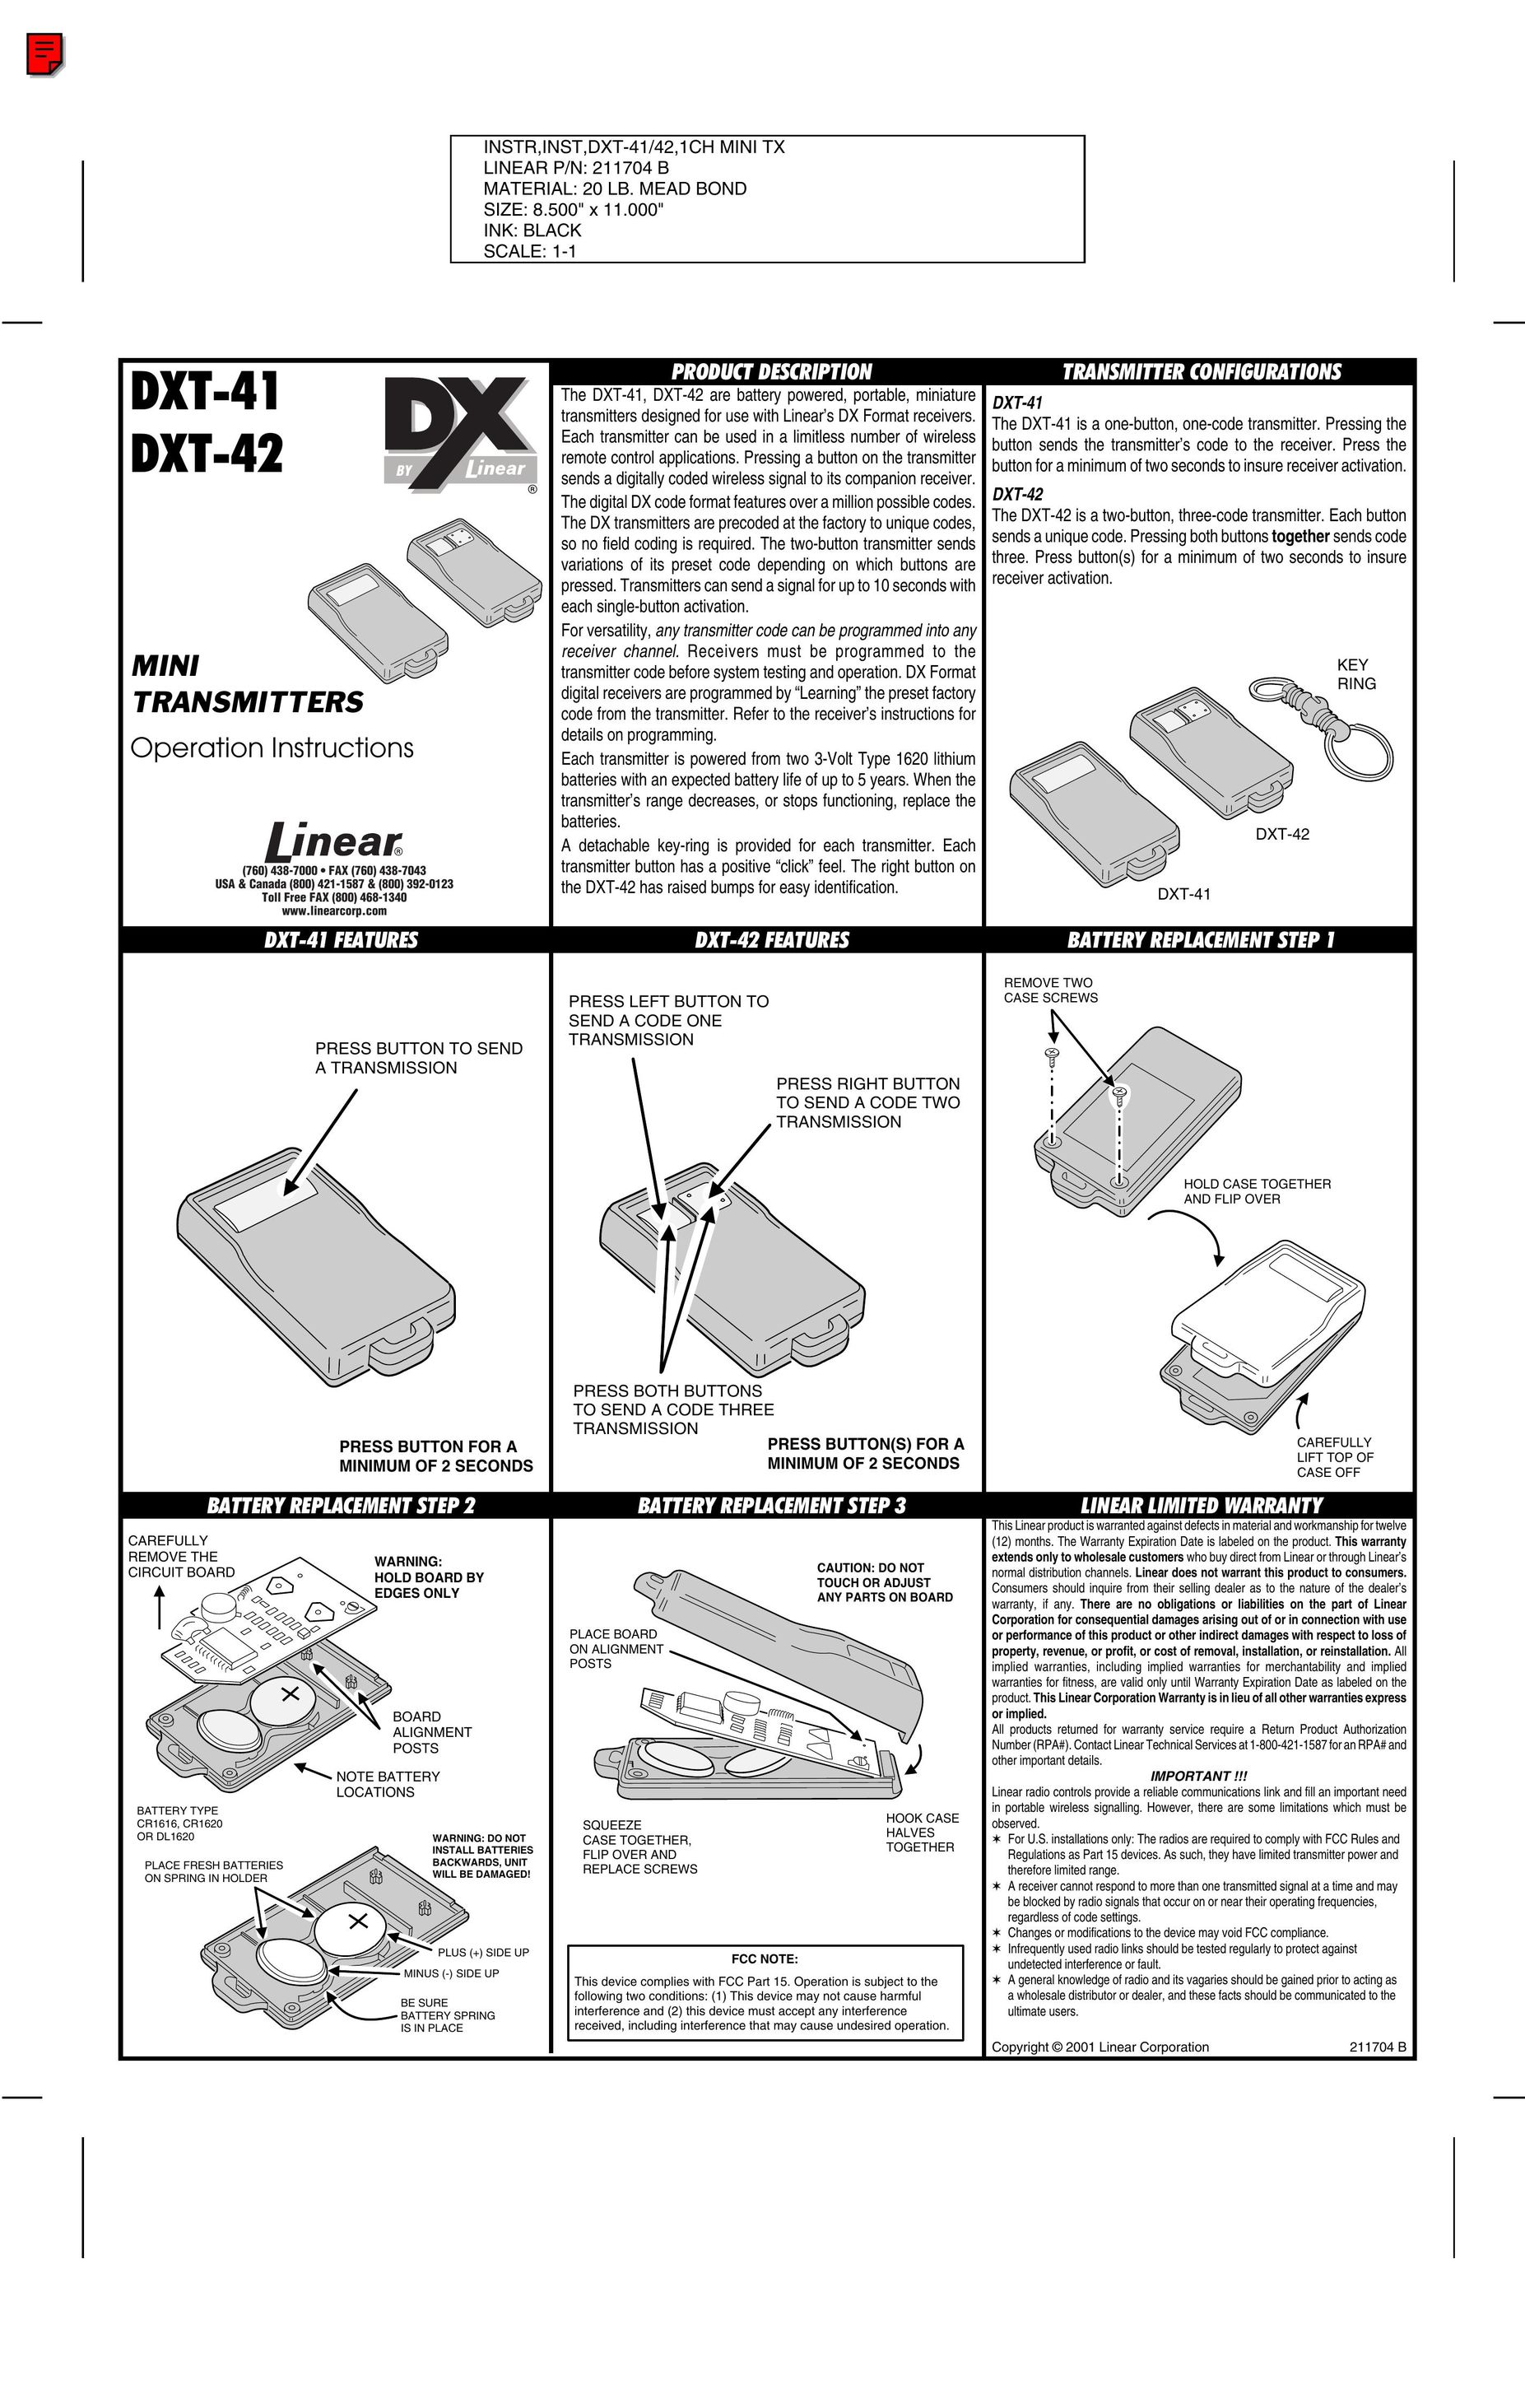 Linear DXT-42 Home Security System User Manual